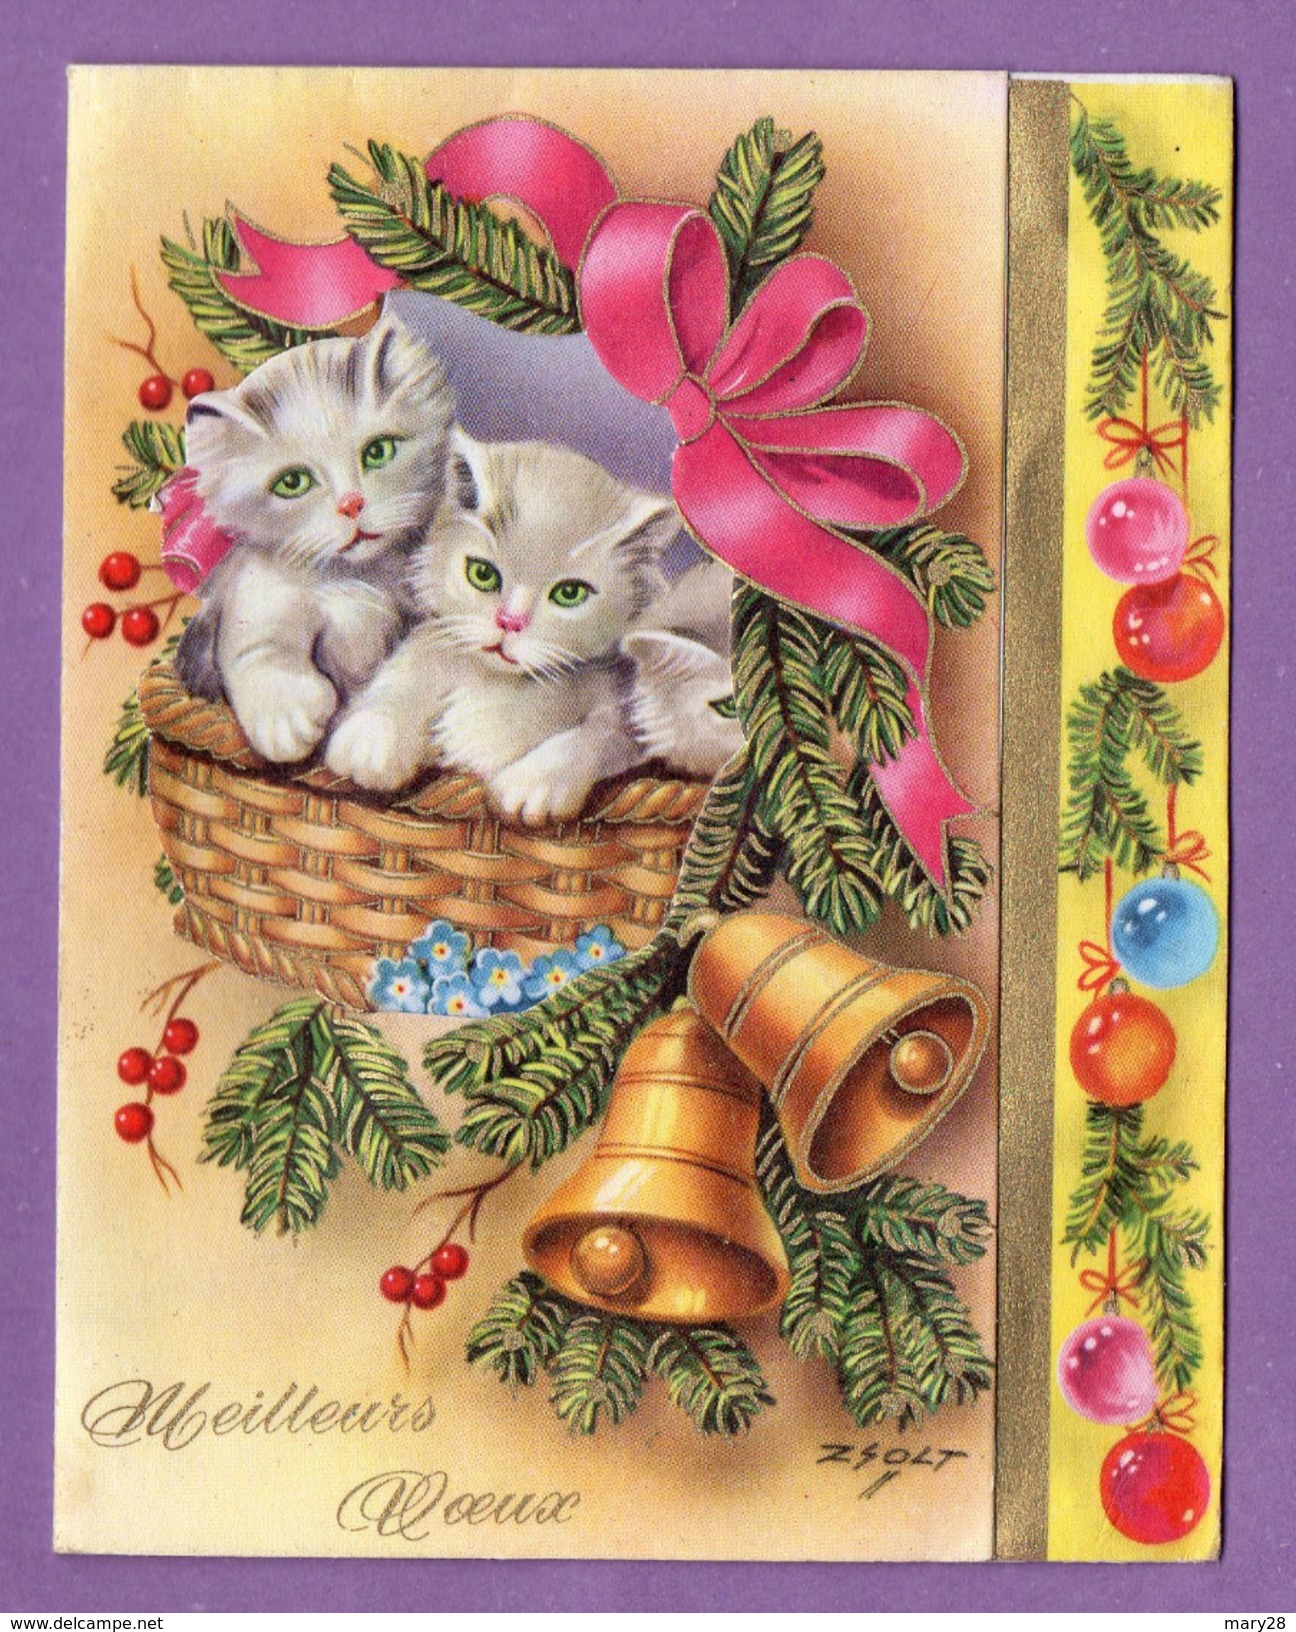 Meilleurs Voeux Zsolt  N° 8345c Chaton Chat - New Year